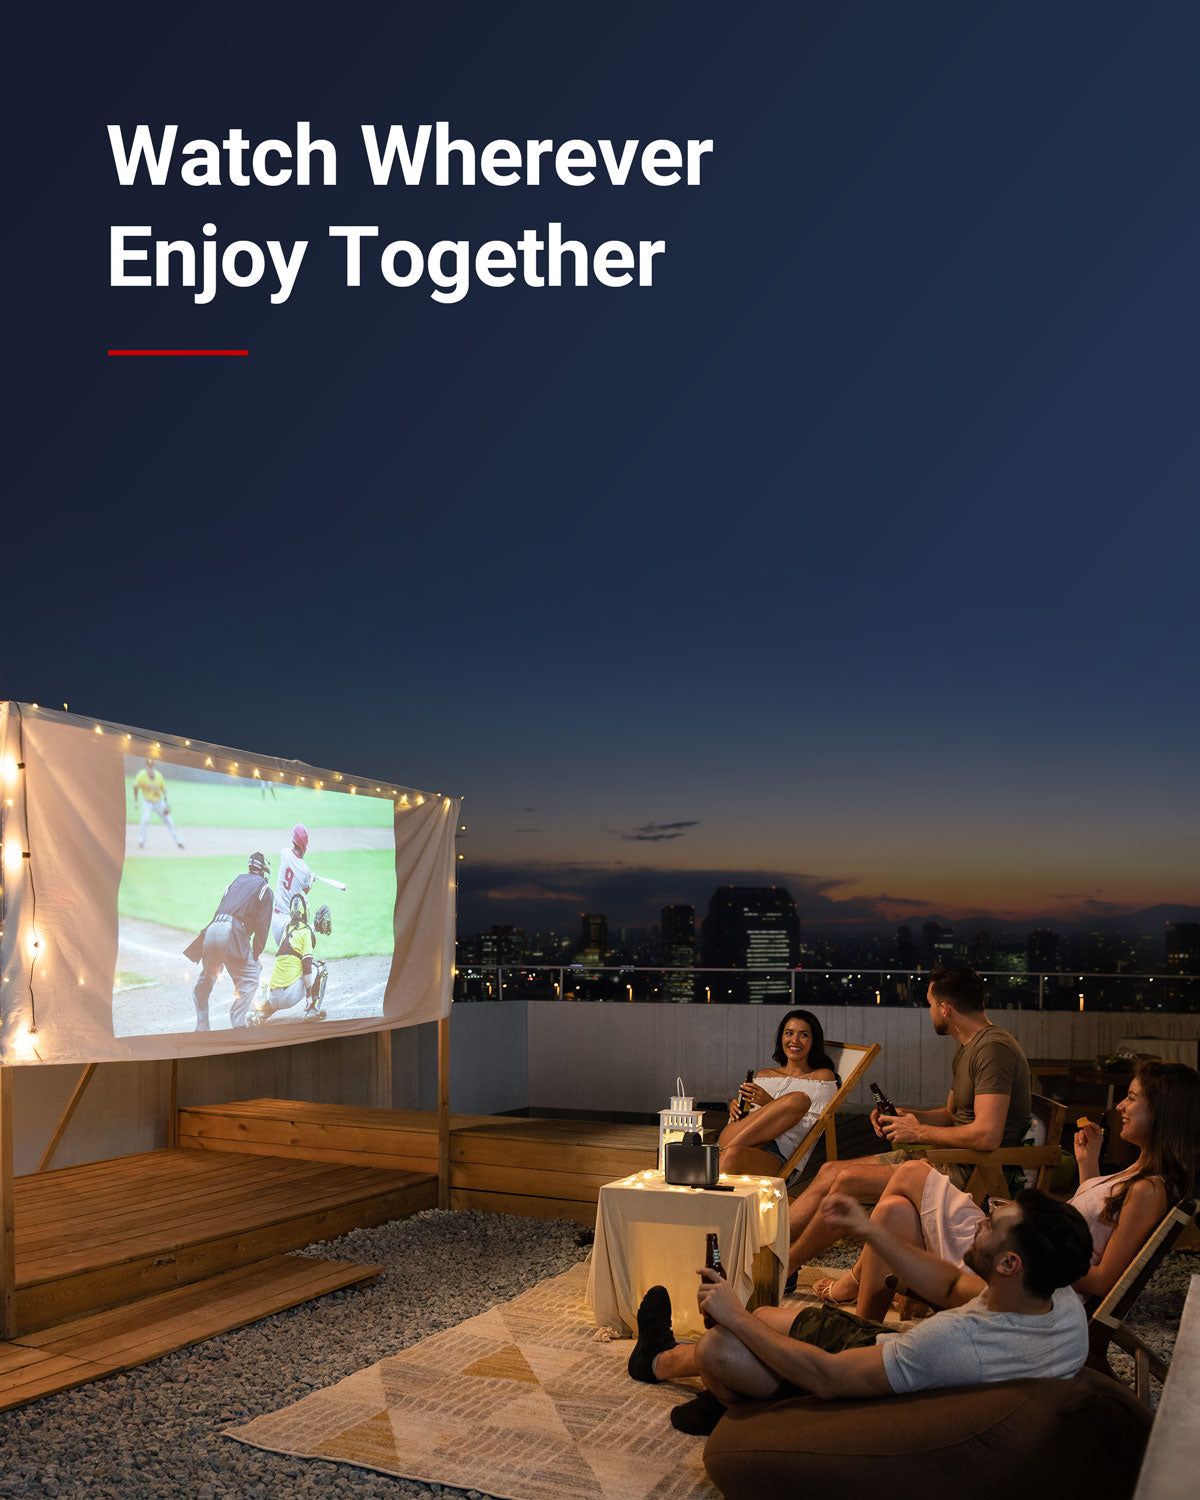 A group of friends use a Mars 2 Pro portable projector at night on their rooftop to watch a baseball batter bunt.